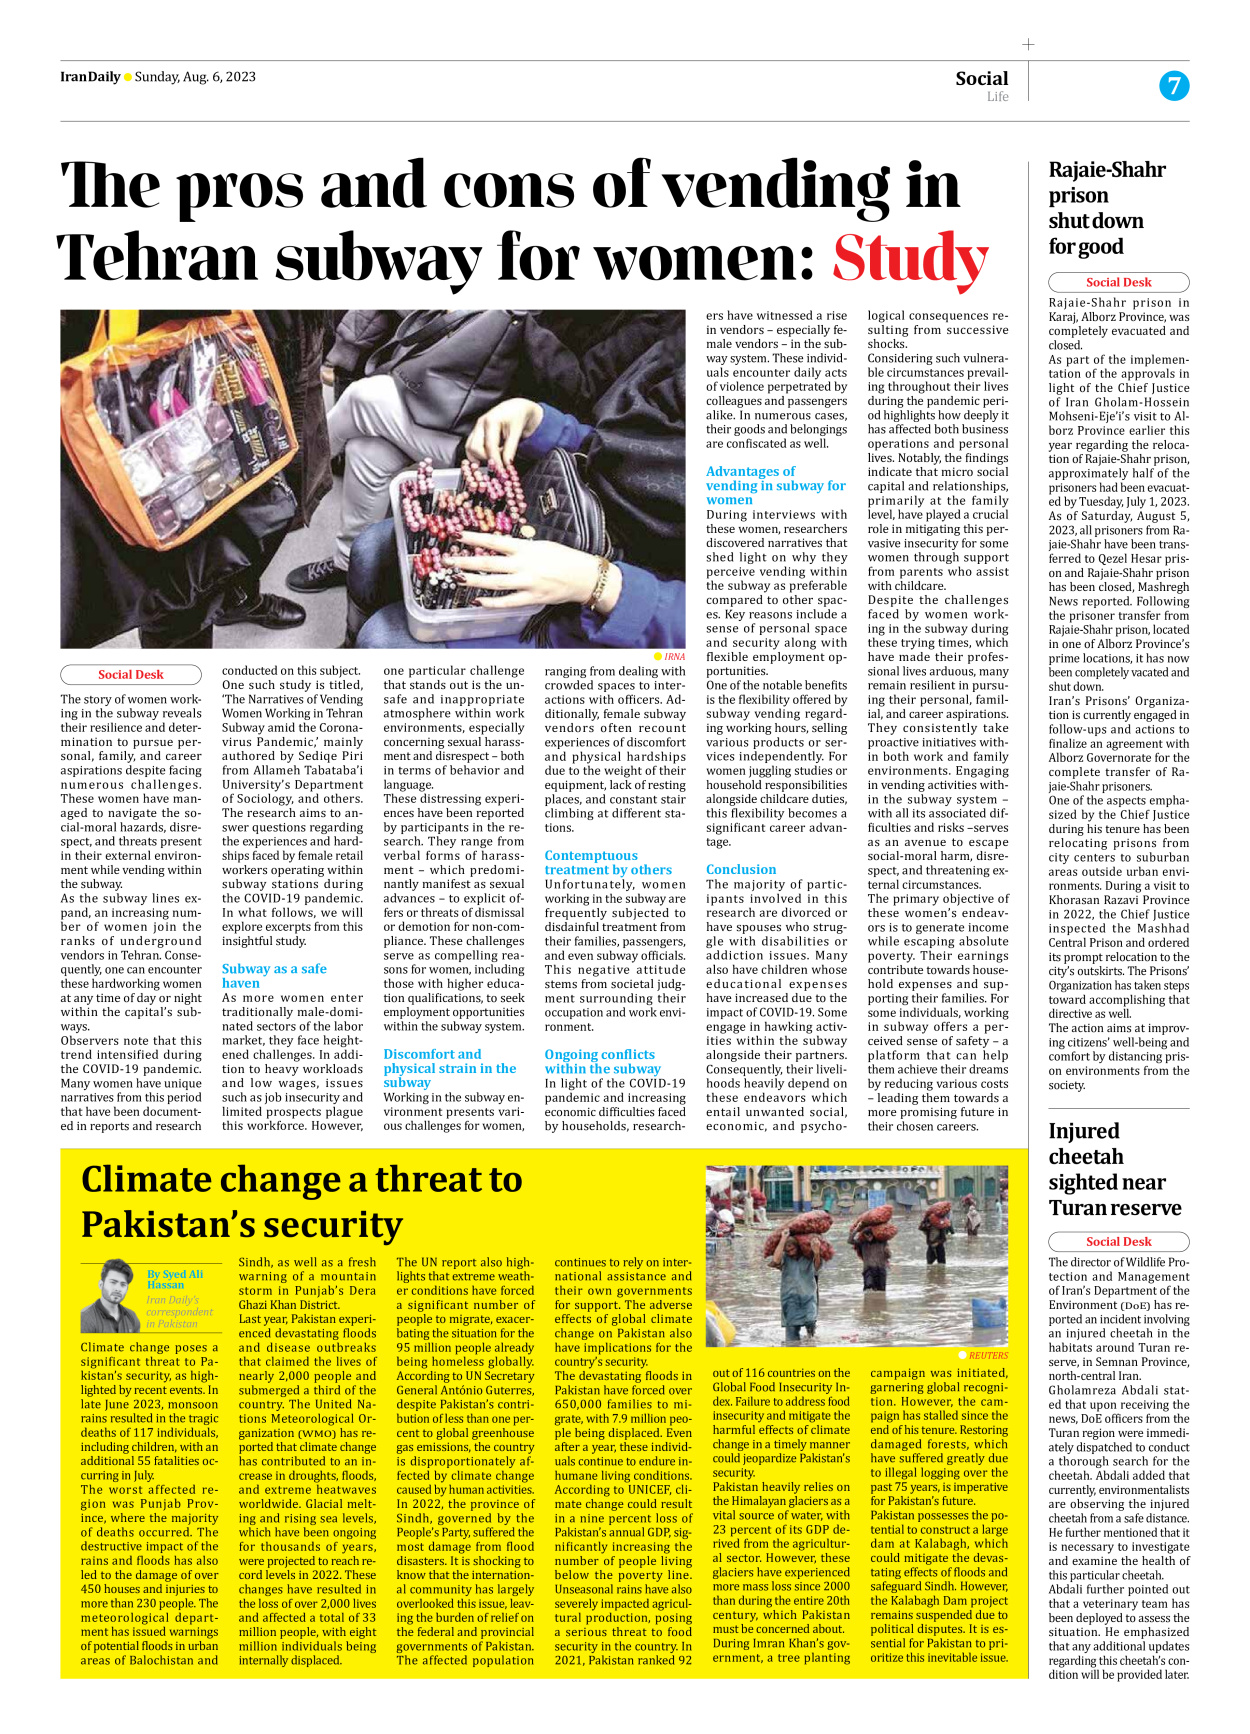 Iran Daily - Number Seven Thousand Three Hundred and Fifty Five - 06 August 2023 - Page 7